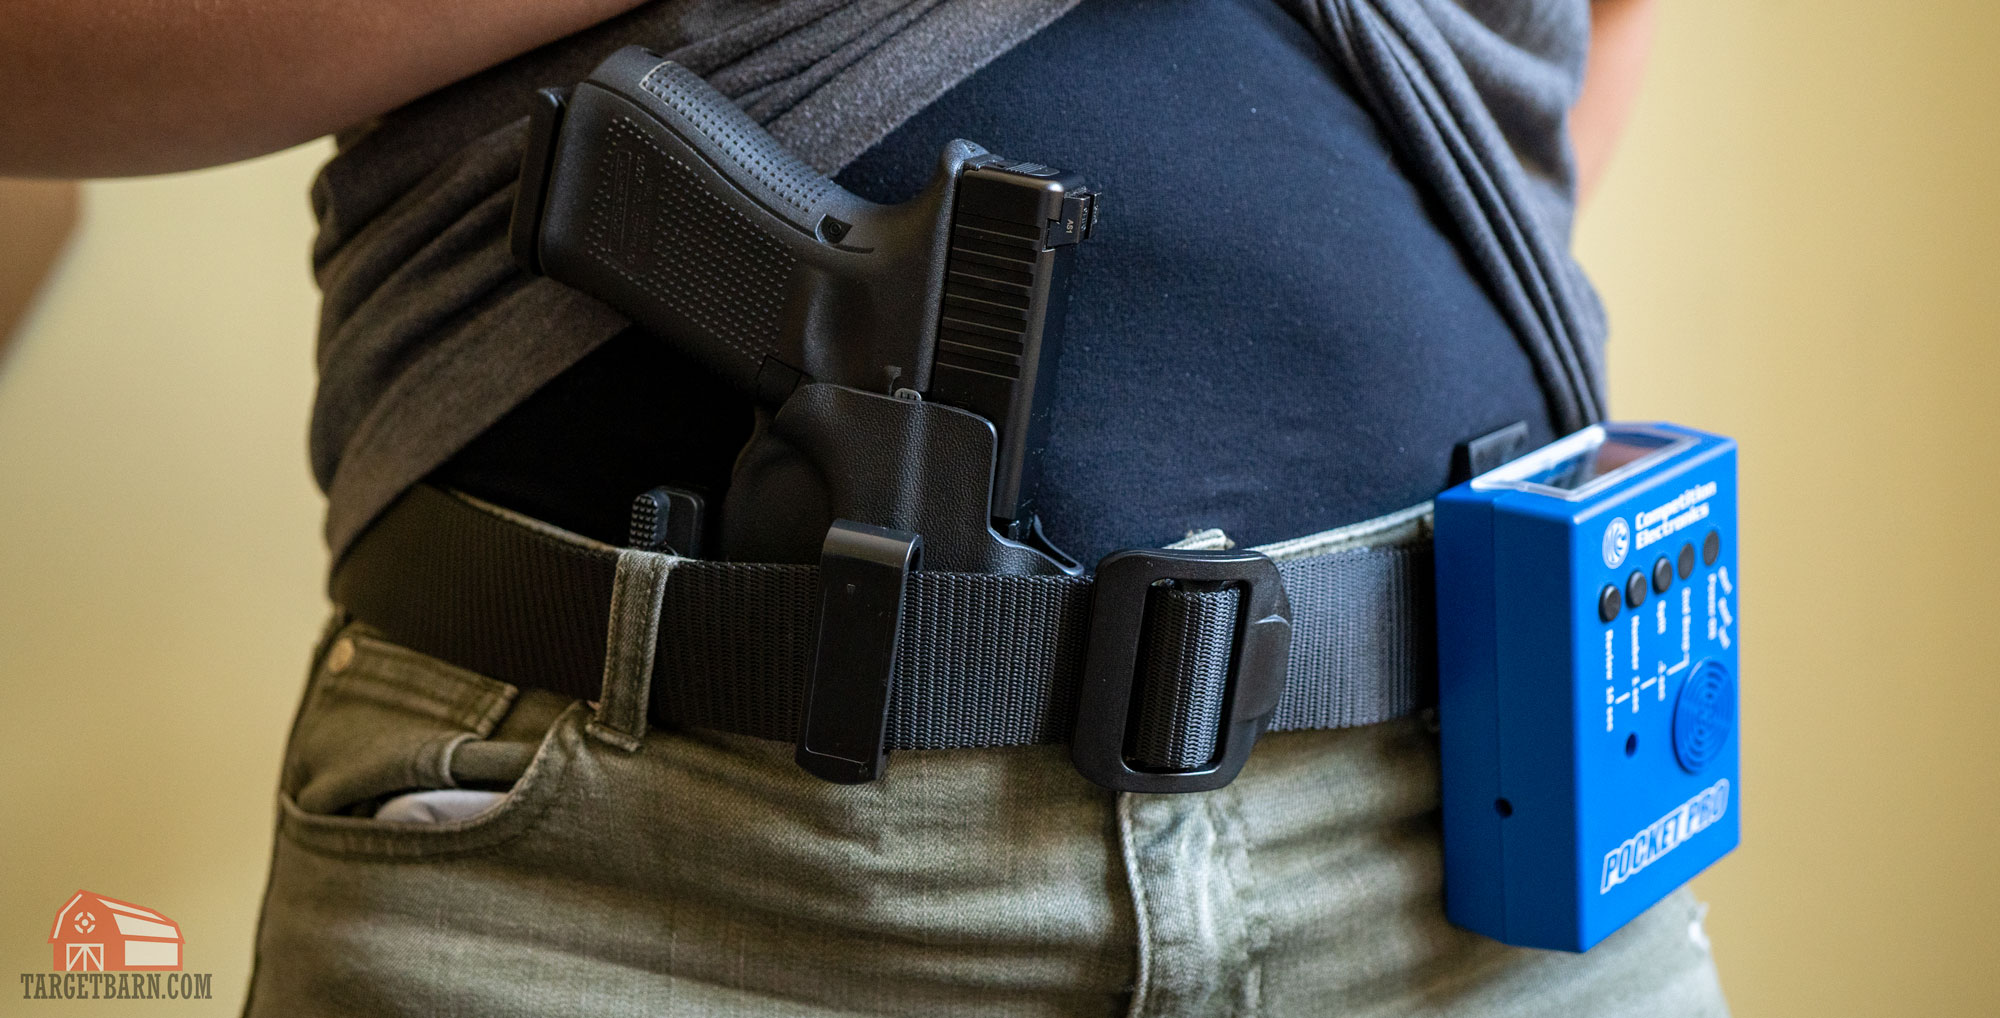 a holstered gun and shot timer for dry fire training